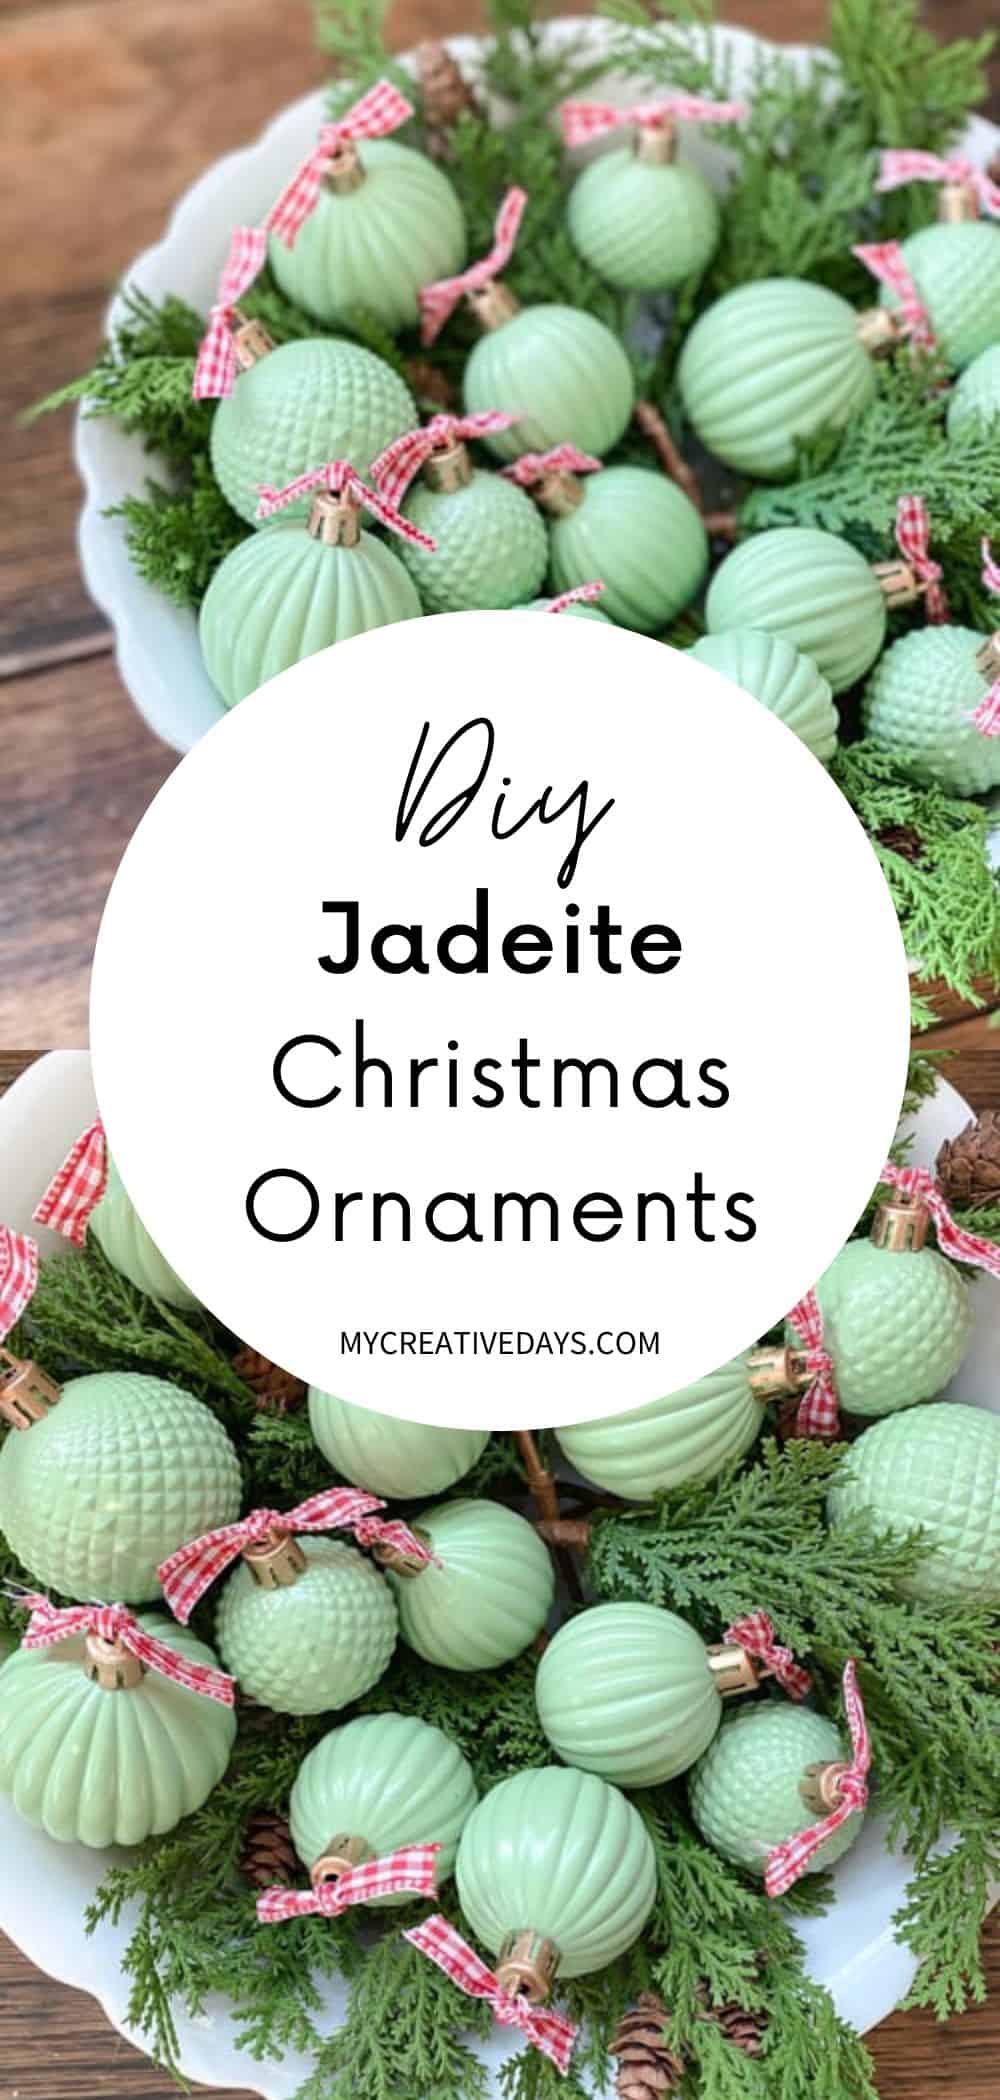 From My Front Porch To Yours: Easy DIY Faux Jadeite Ornaments